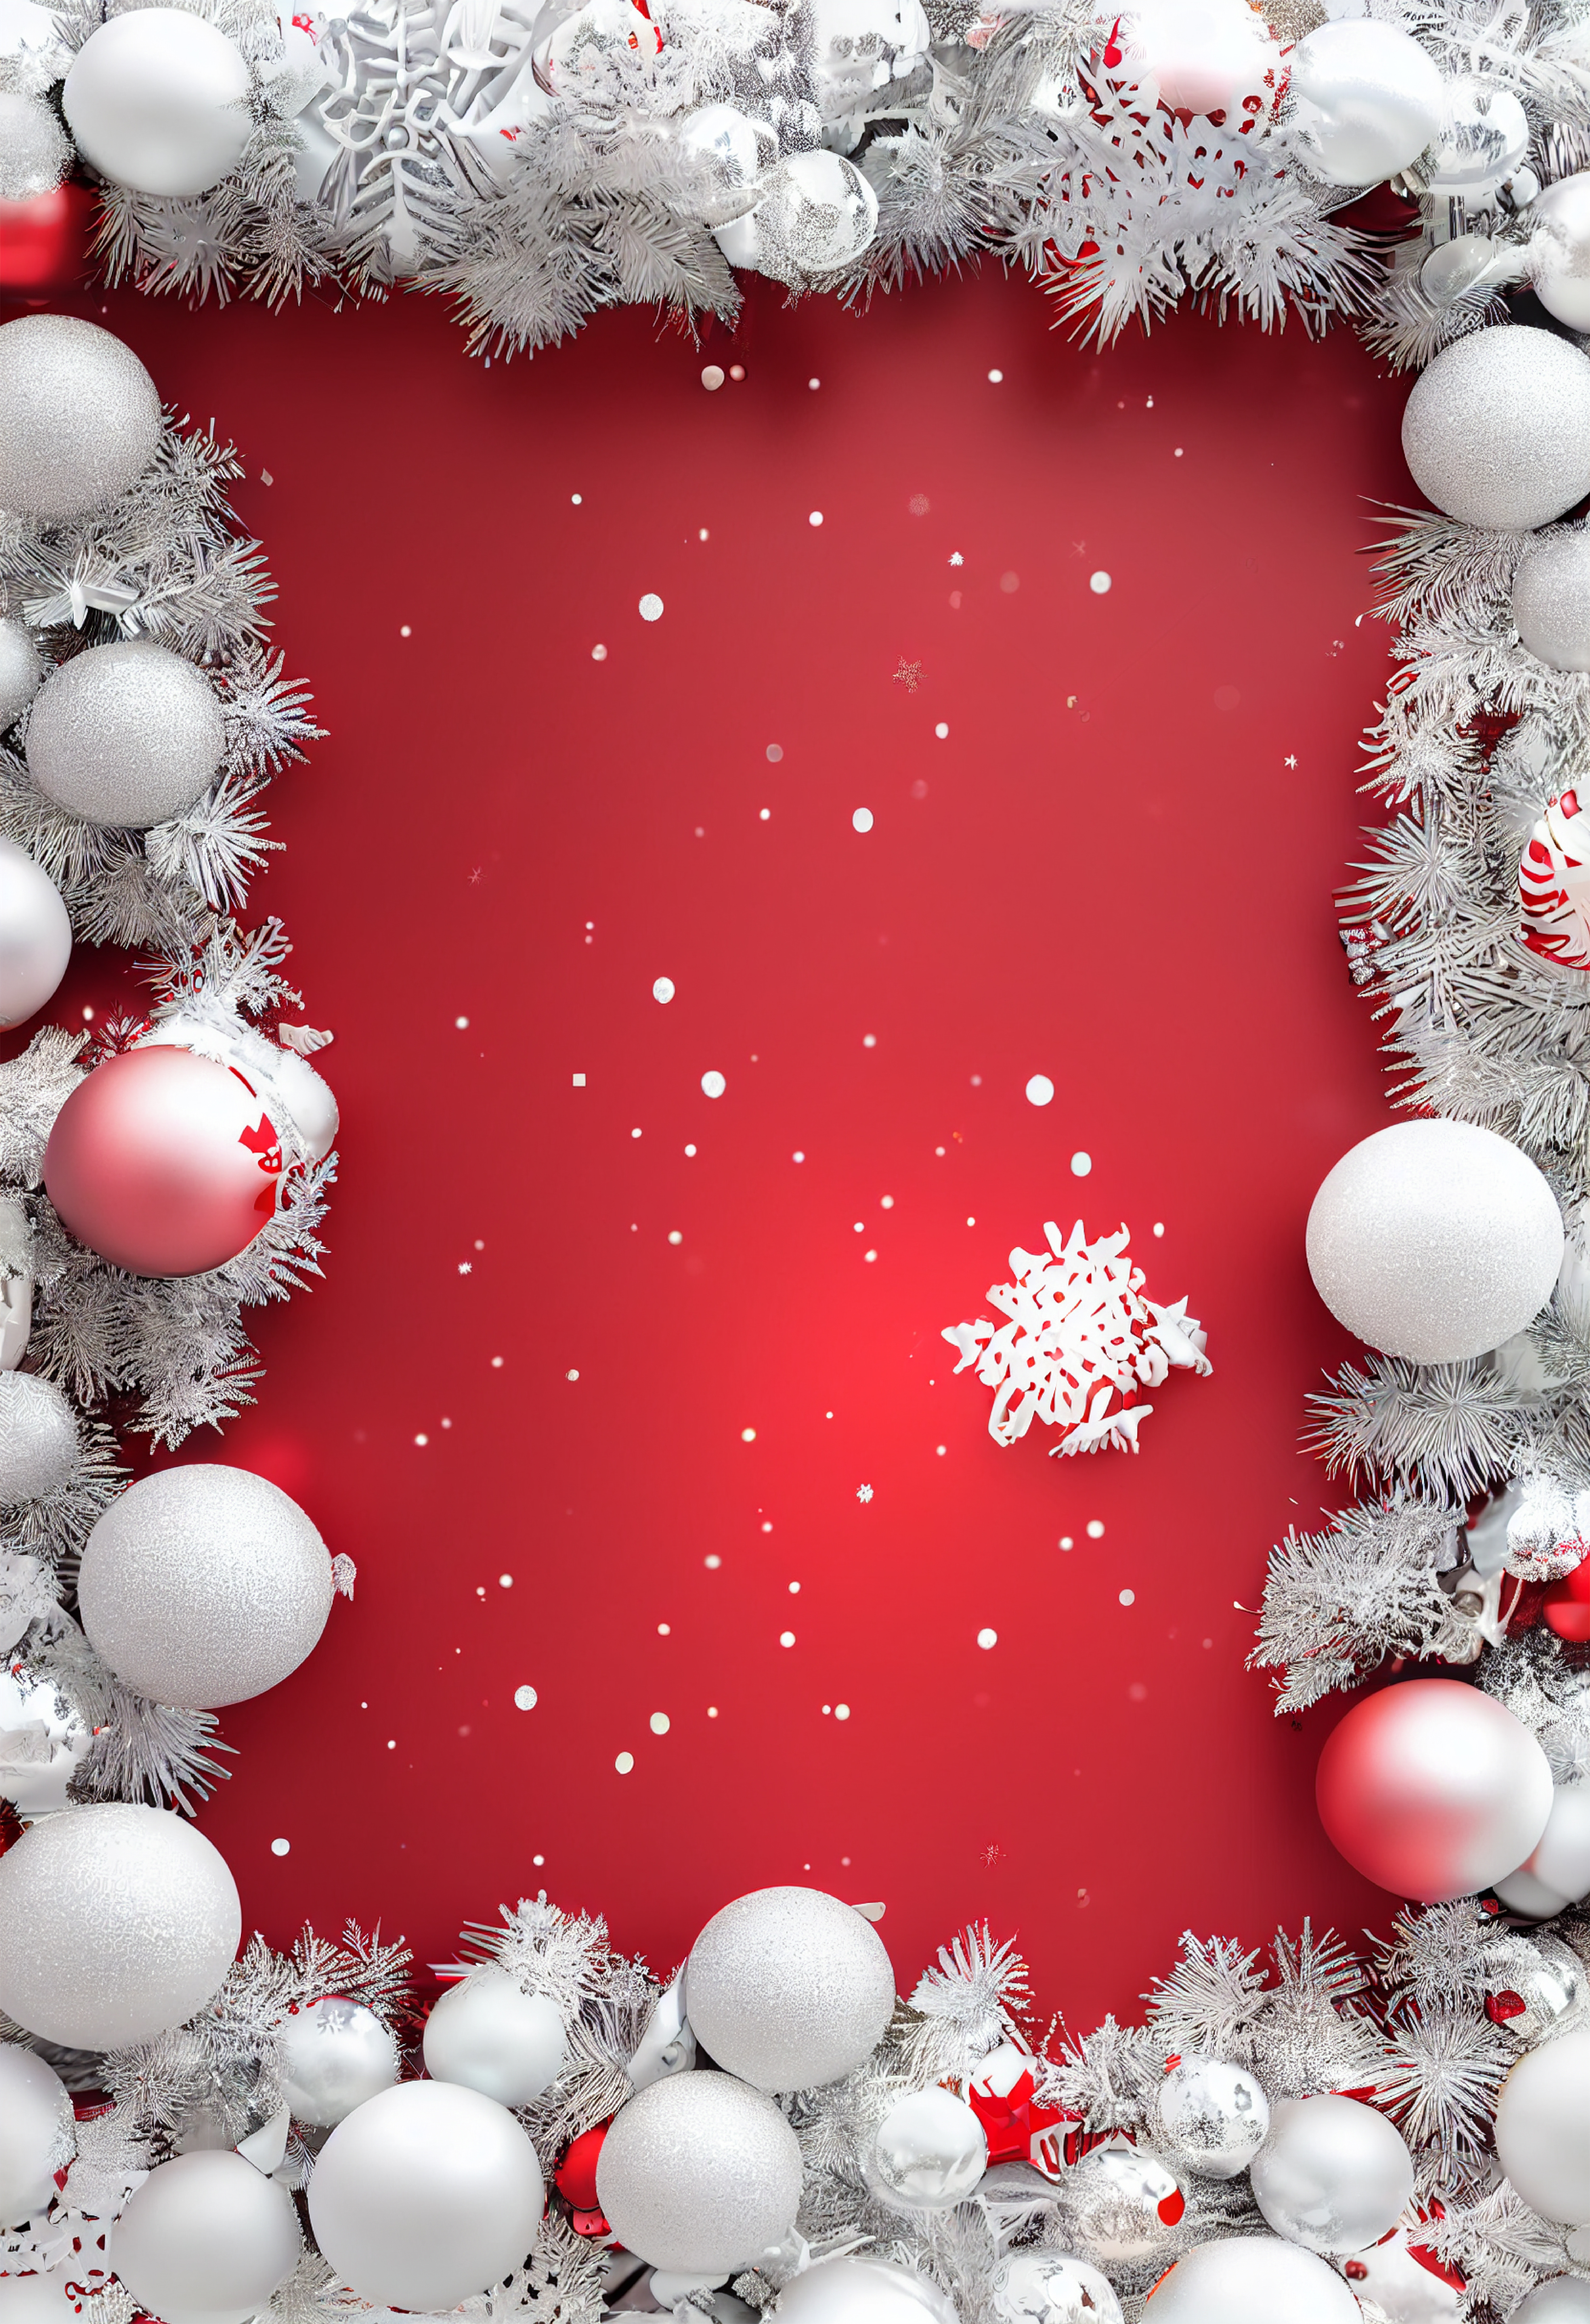 Free Red Christmas Frame Background Image